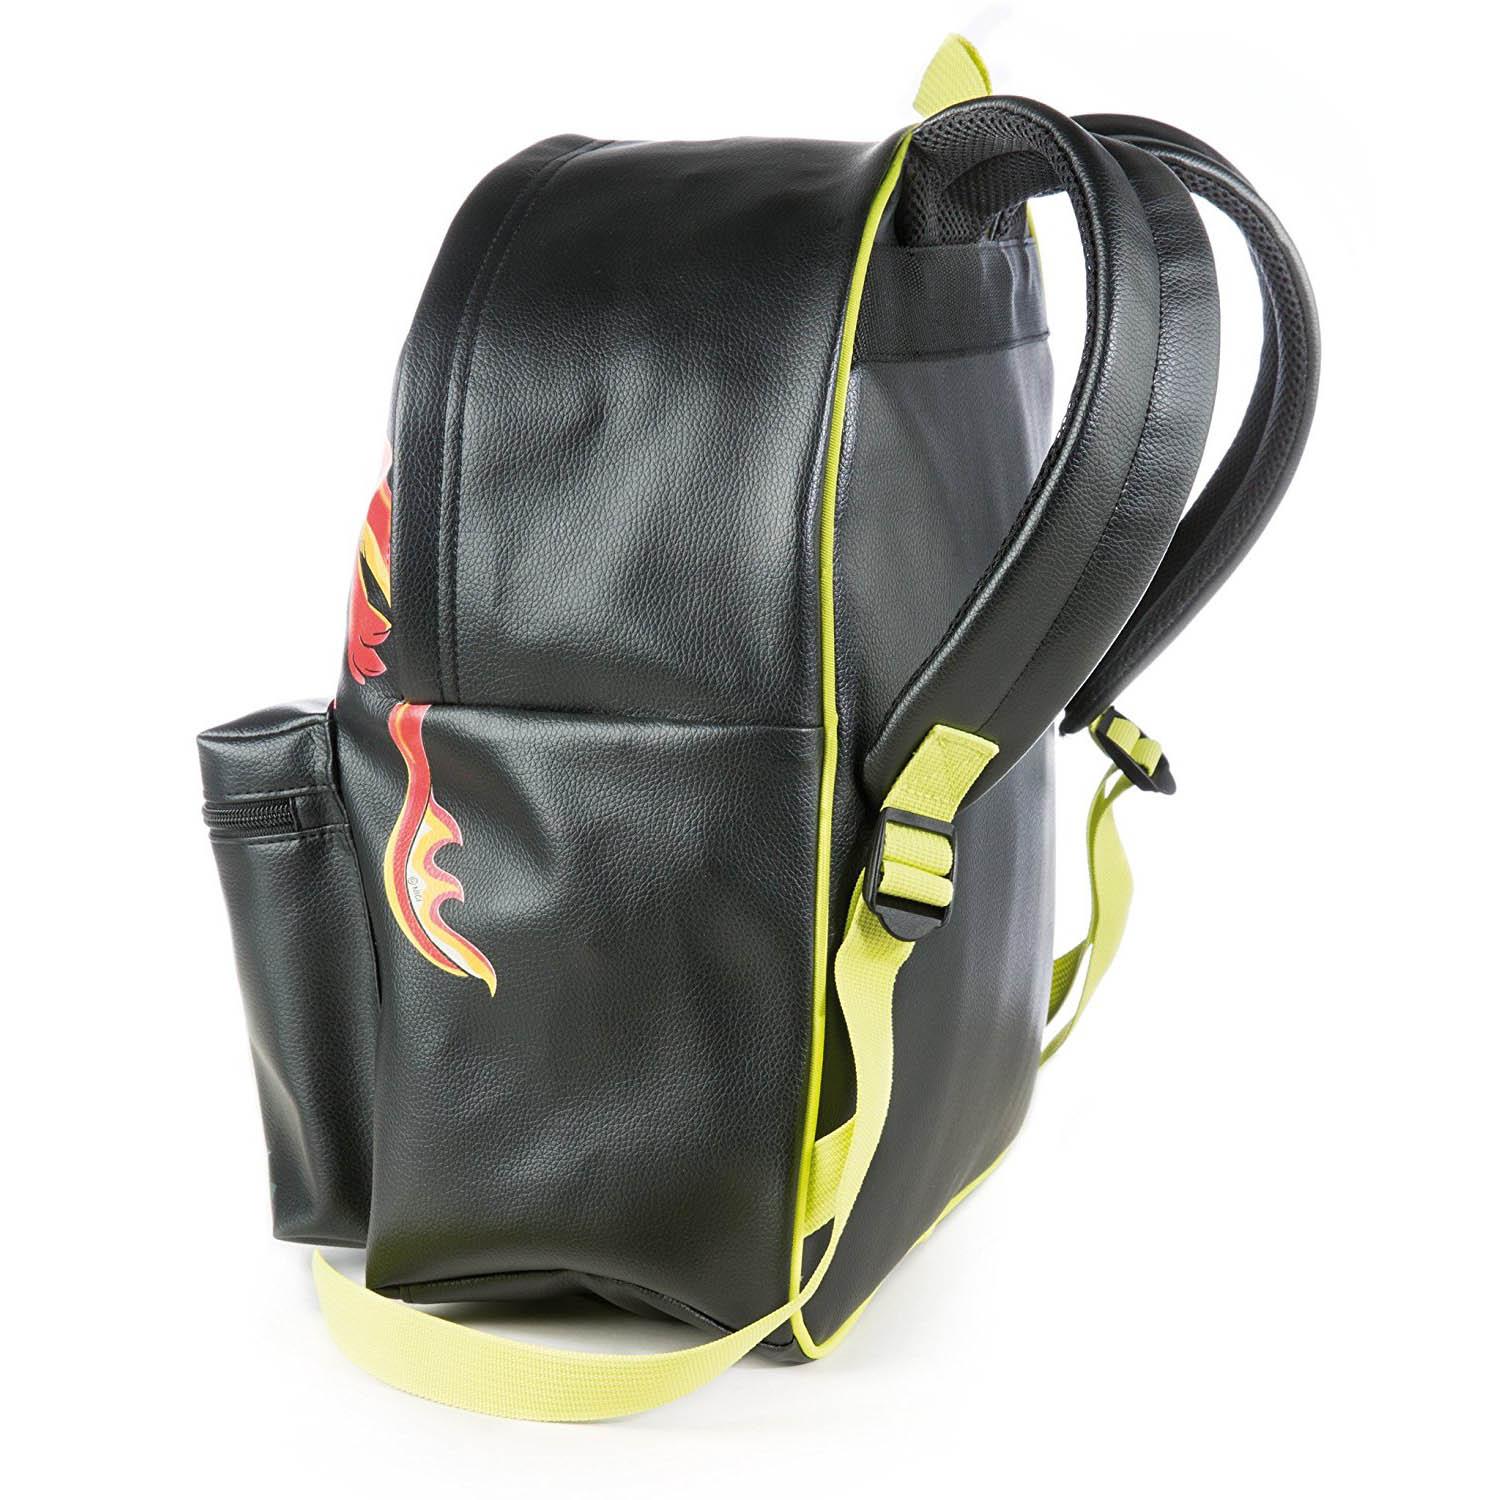 BACKPACK DRAGONS IMITATION LEATHER 36X41X15,5CM 